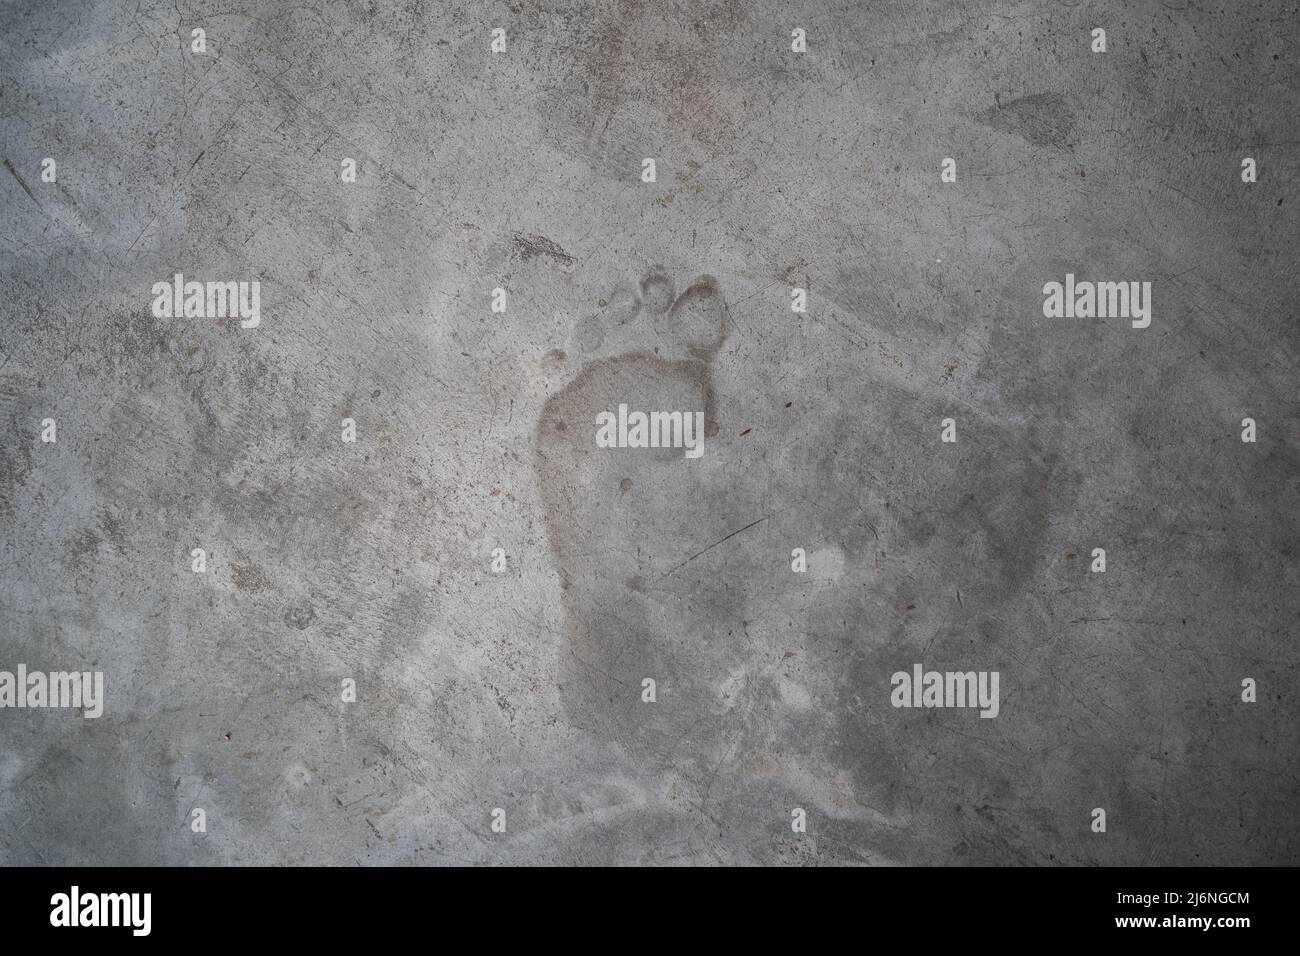 Concrete texture with left human footprint Stock Photo